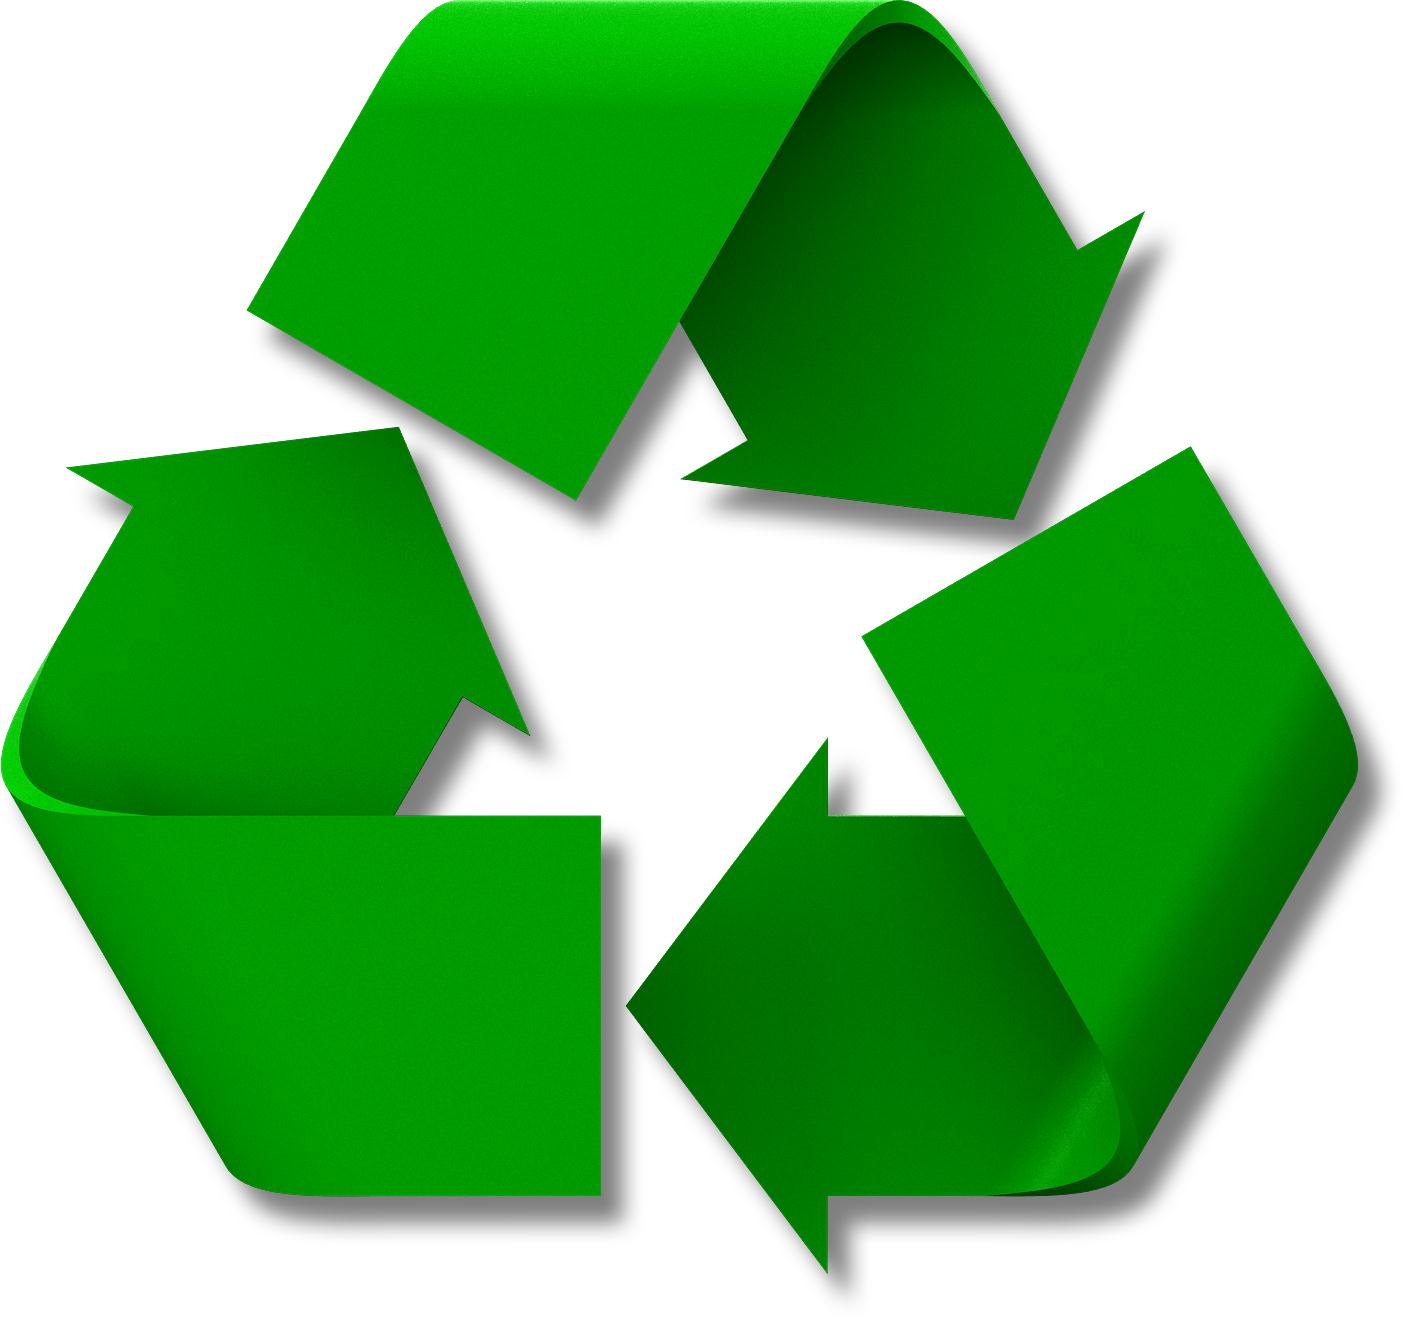 Picture Of Recycle Bin - Clipart library